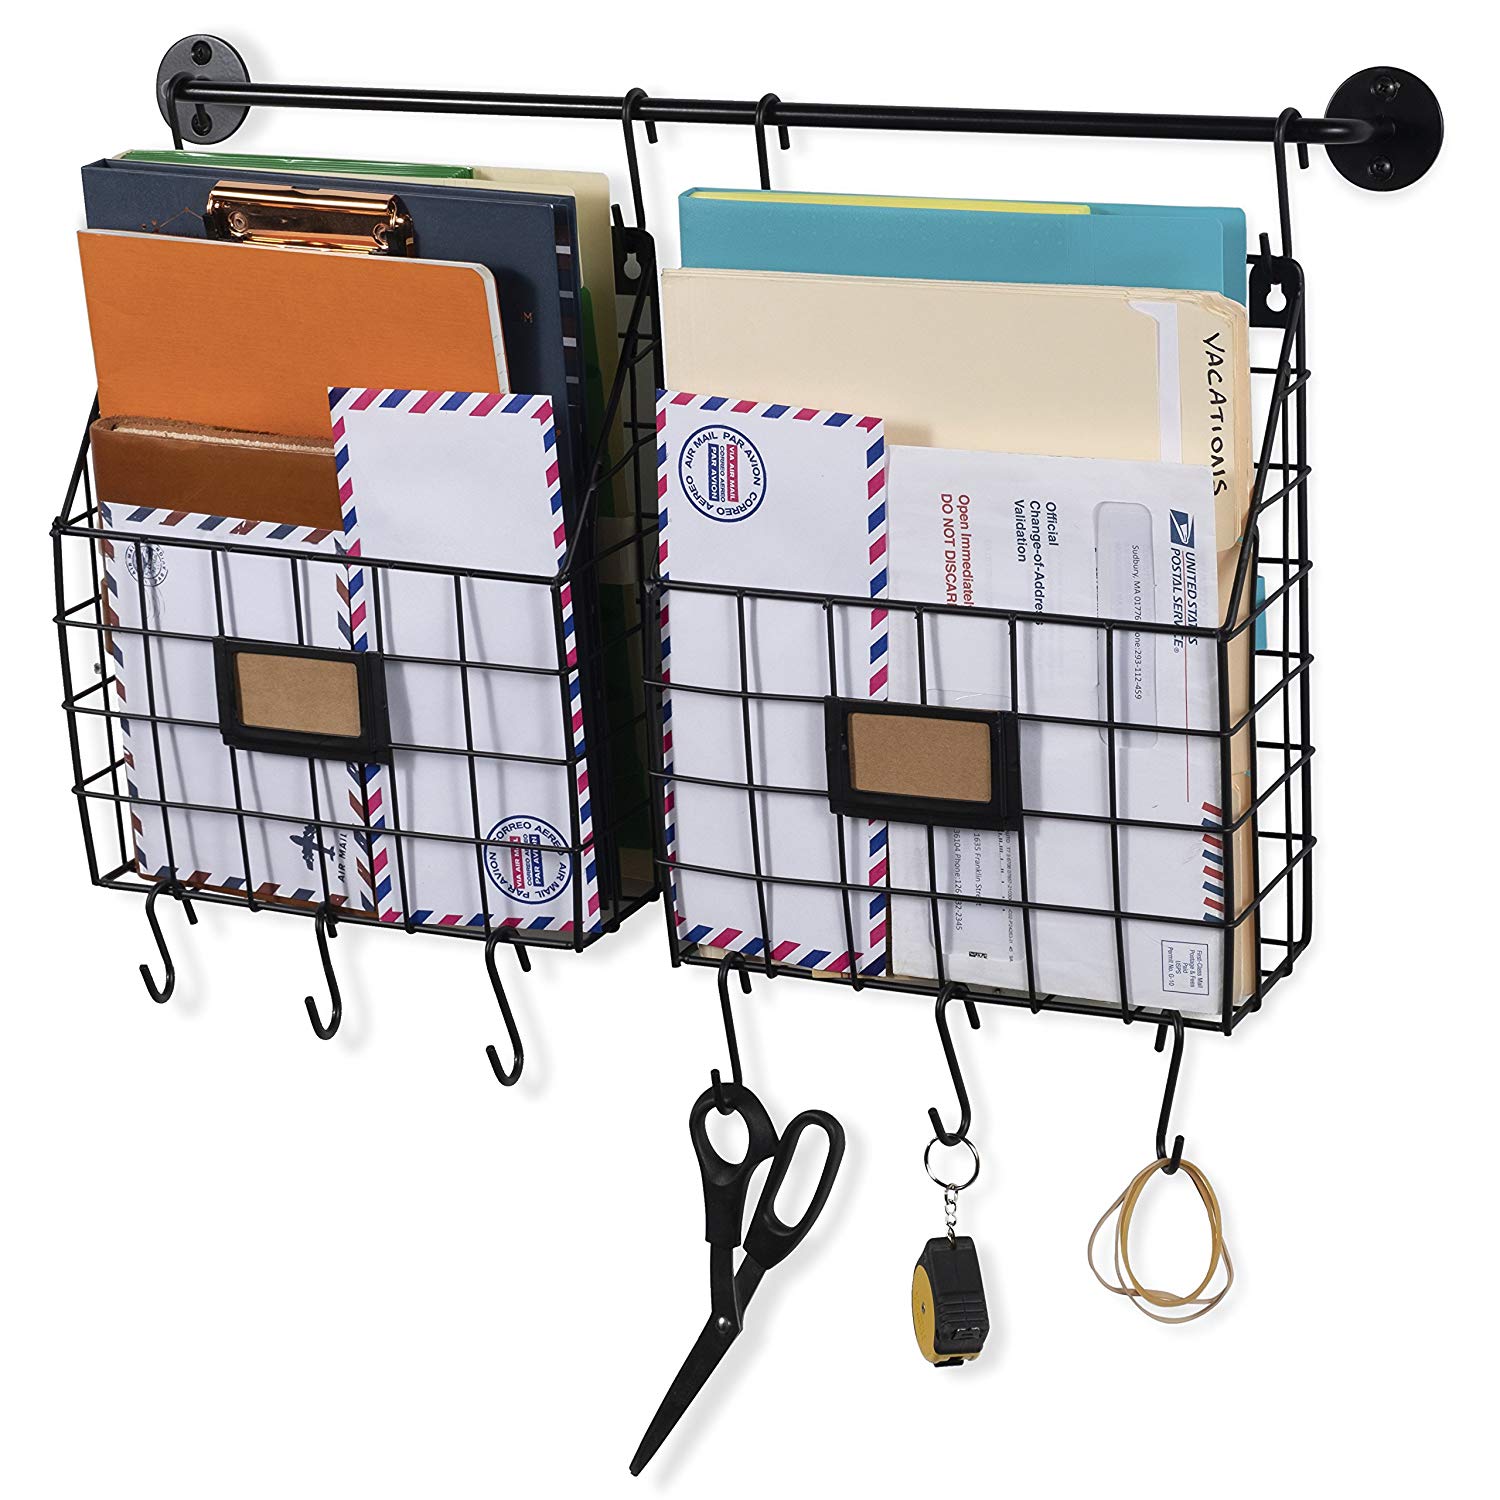 Wall35 Rivista Wall Mounted Metal Wire Baskets with Rail and Hooks - Rustic Design Multi-use Hanging File Folder - Mail Entryway Organizer - Kitchen Utensil Storage - Black